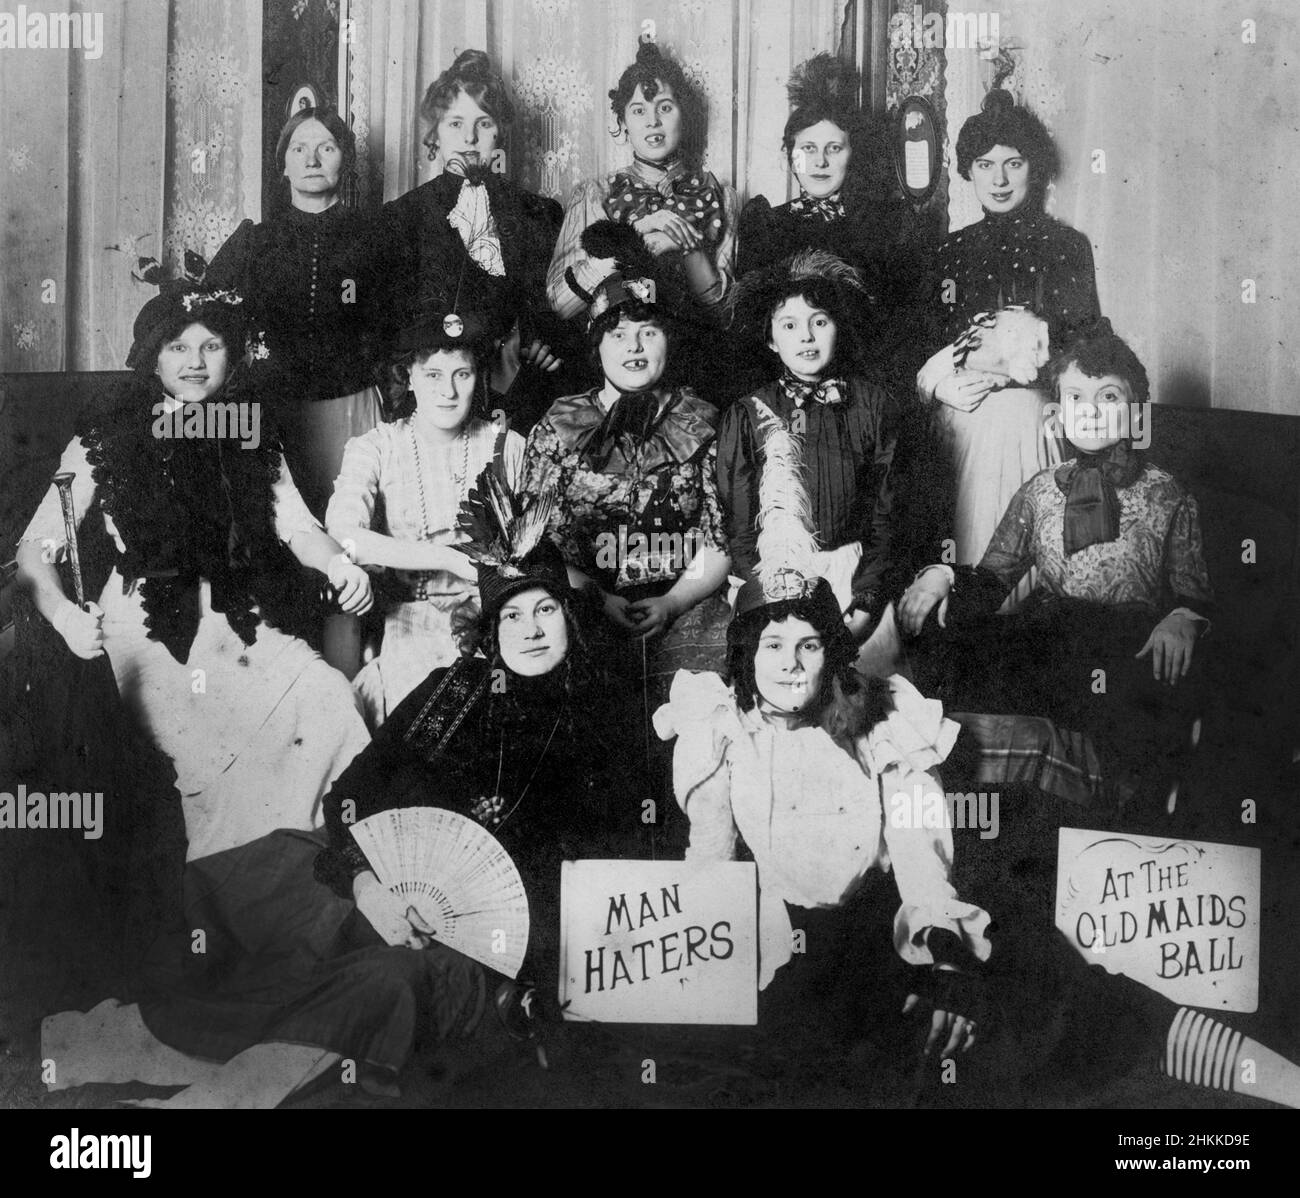 A group of costumed women are 'Man Haters' at the 'Old Maids Ball,' ca. 1910. Stock Photo